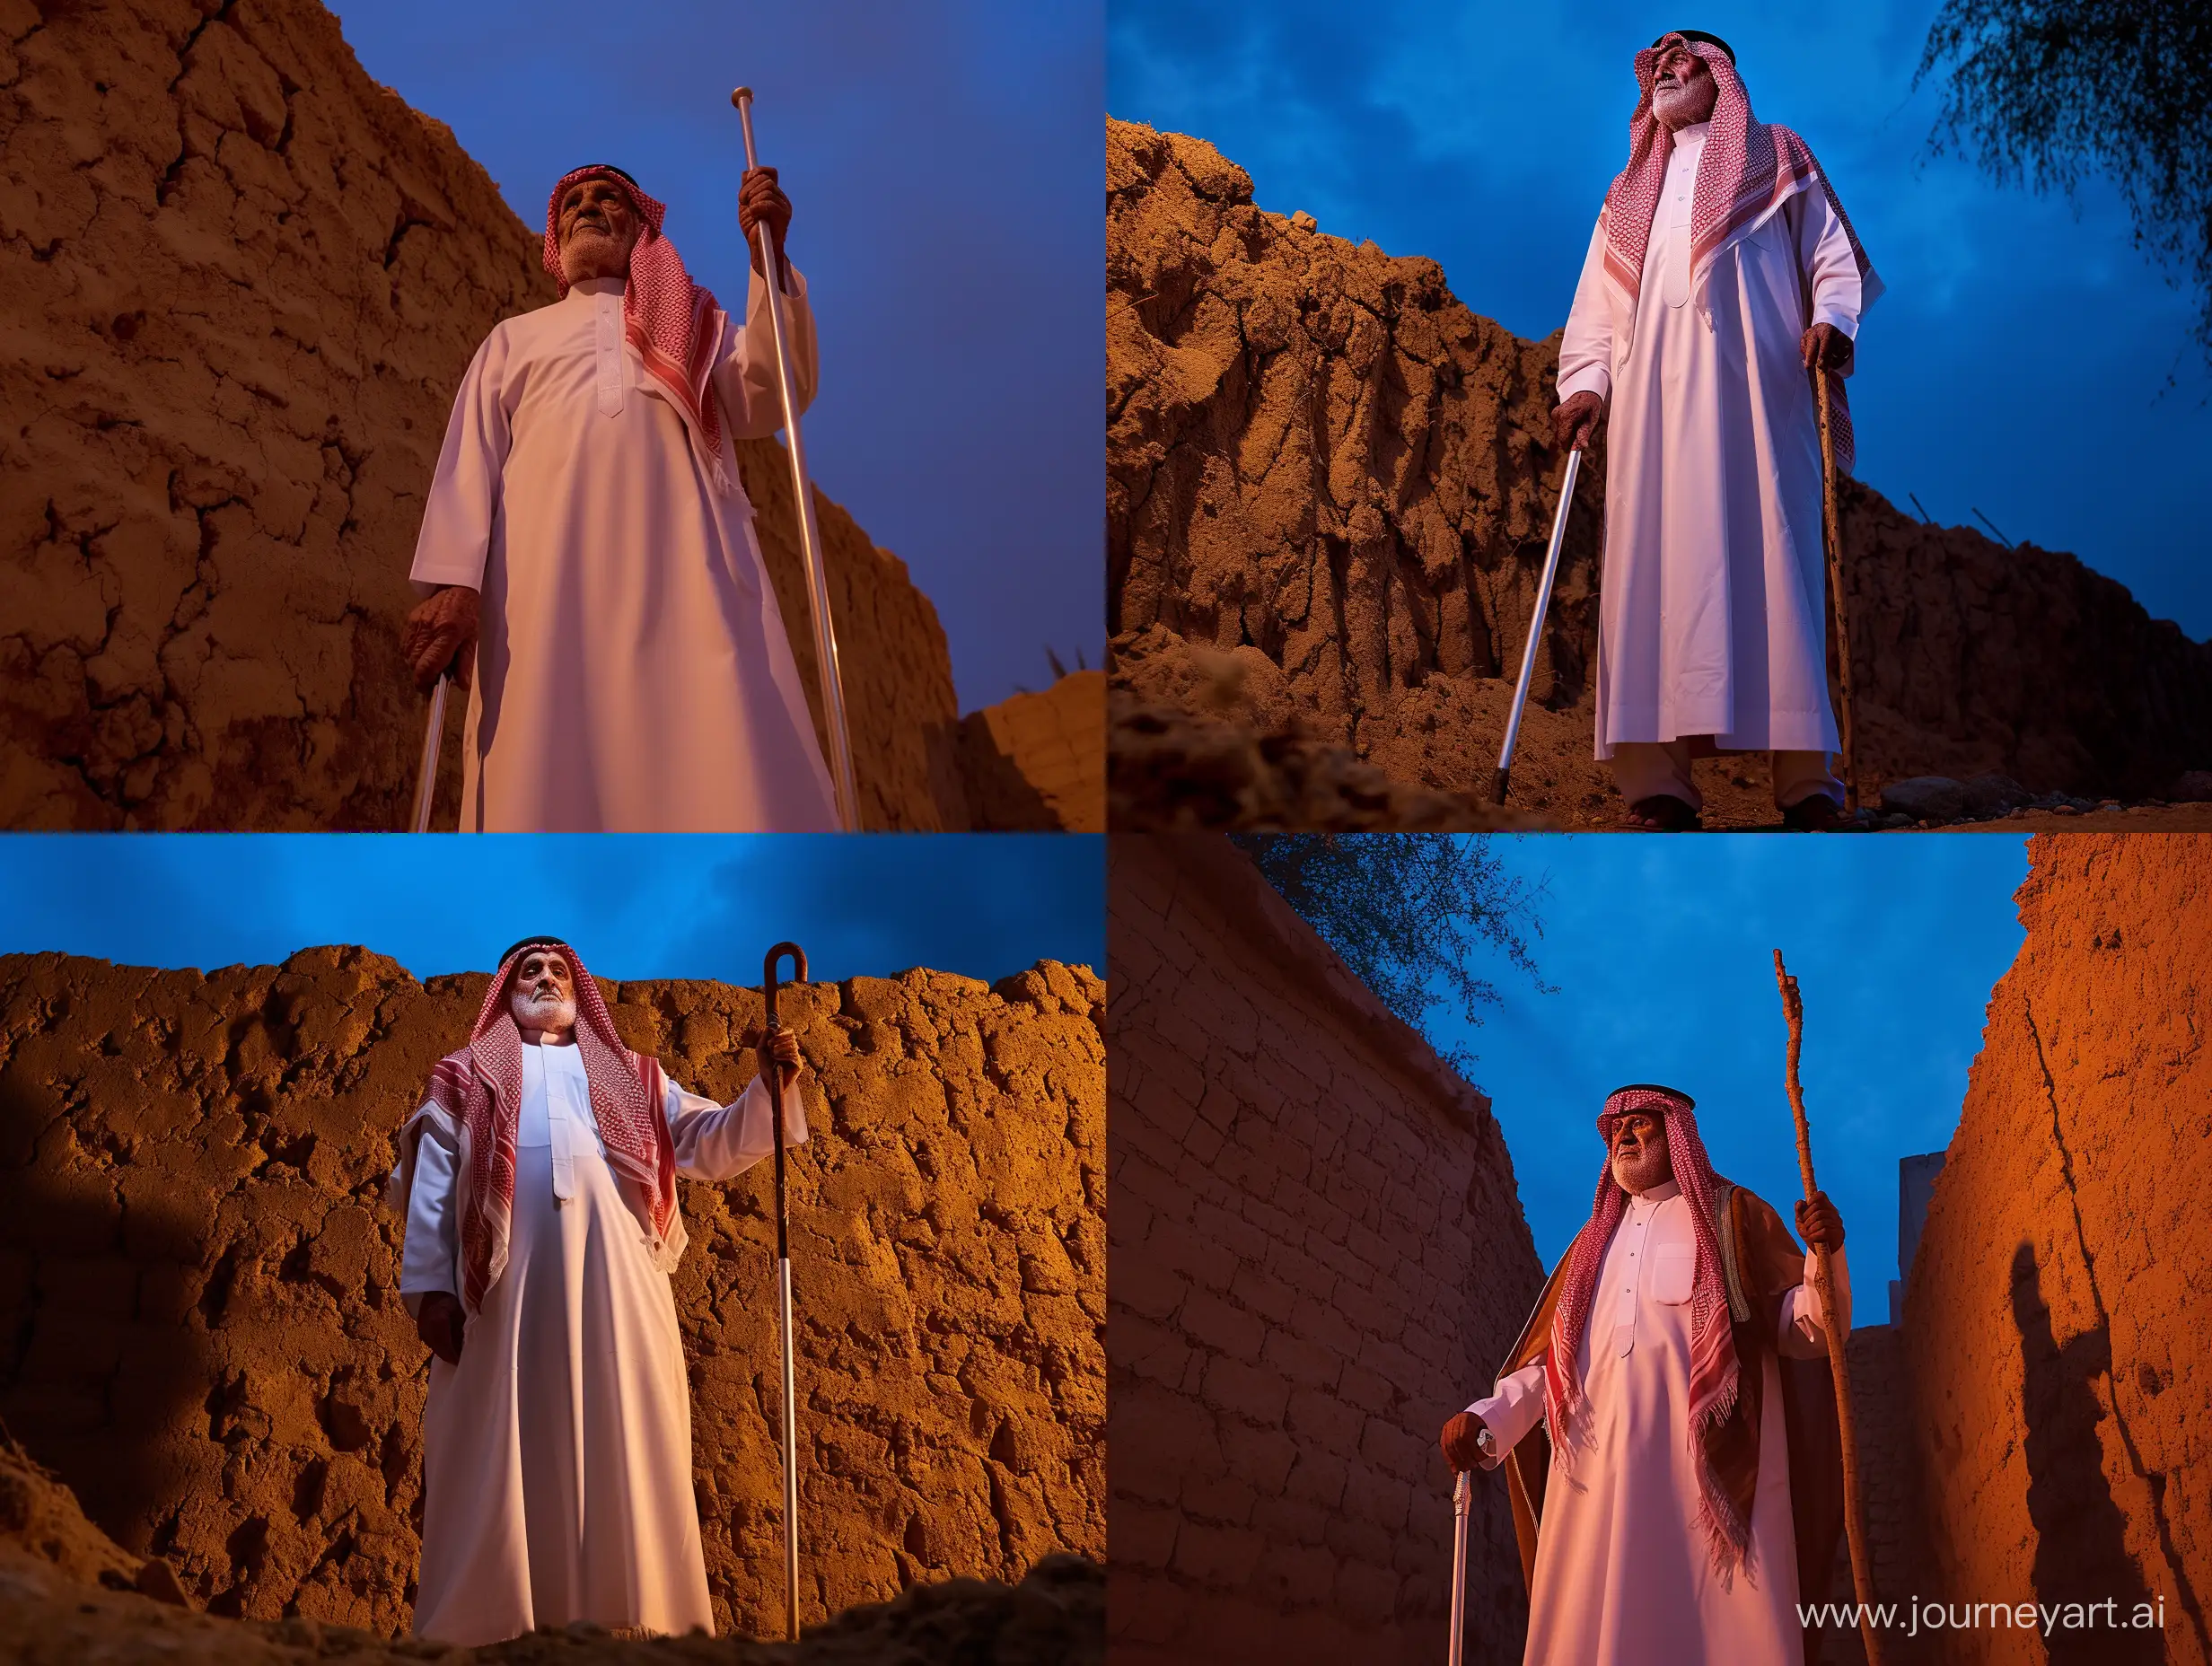 An opening photo of an old Saudi prince wearing the traditional white Saudi dress and a red shemagh, standing in front of a mud wall holding his cane at night time and dim lighting, cinematic and dramatic style with brown tones, and he appears confident, the camera is at a low angle pointing upwards, the sky is blue, and a full-body shot, Landscape, shot by‎‏ Sony PXW-FS5 XDCAM Super 35,